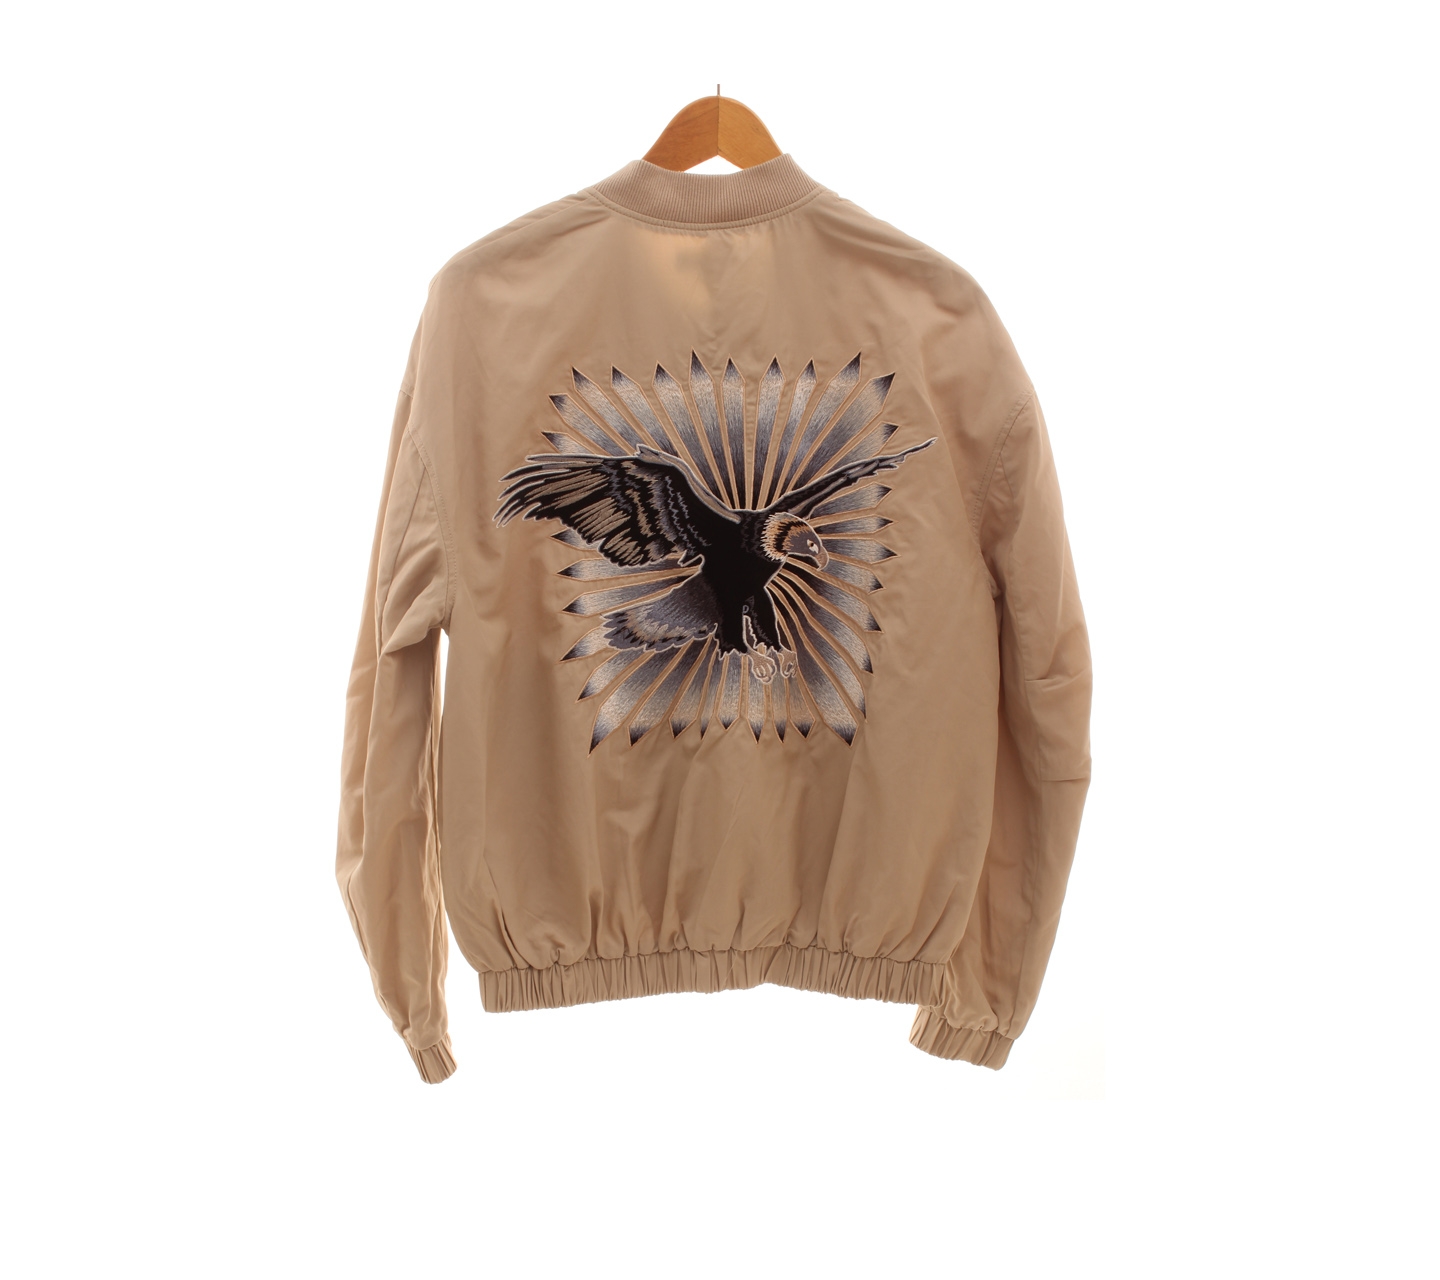 H&M Beige Embroidery Jacket